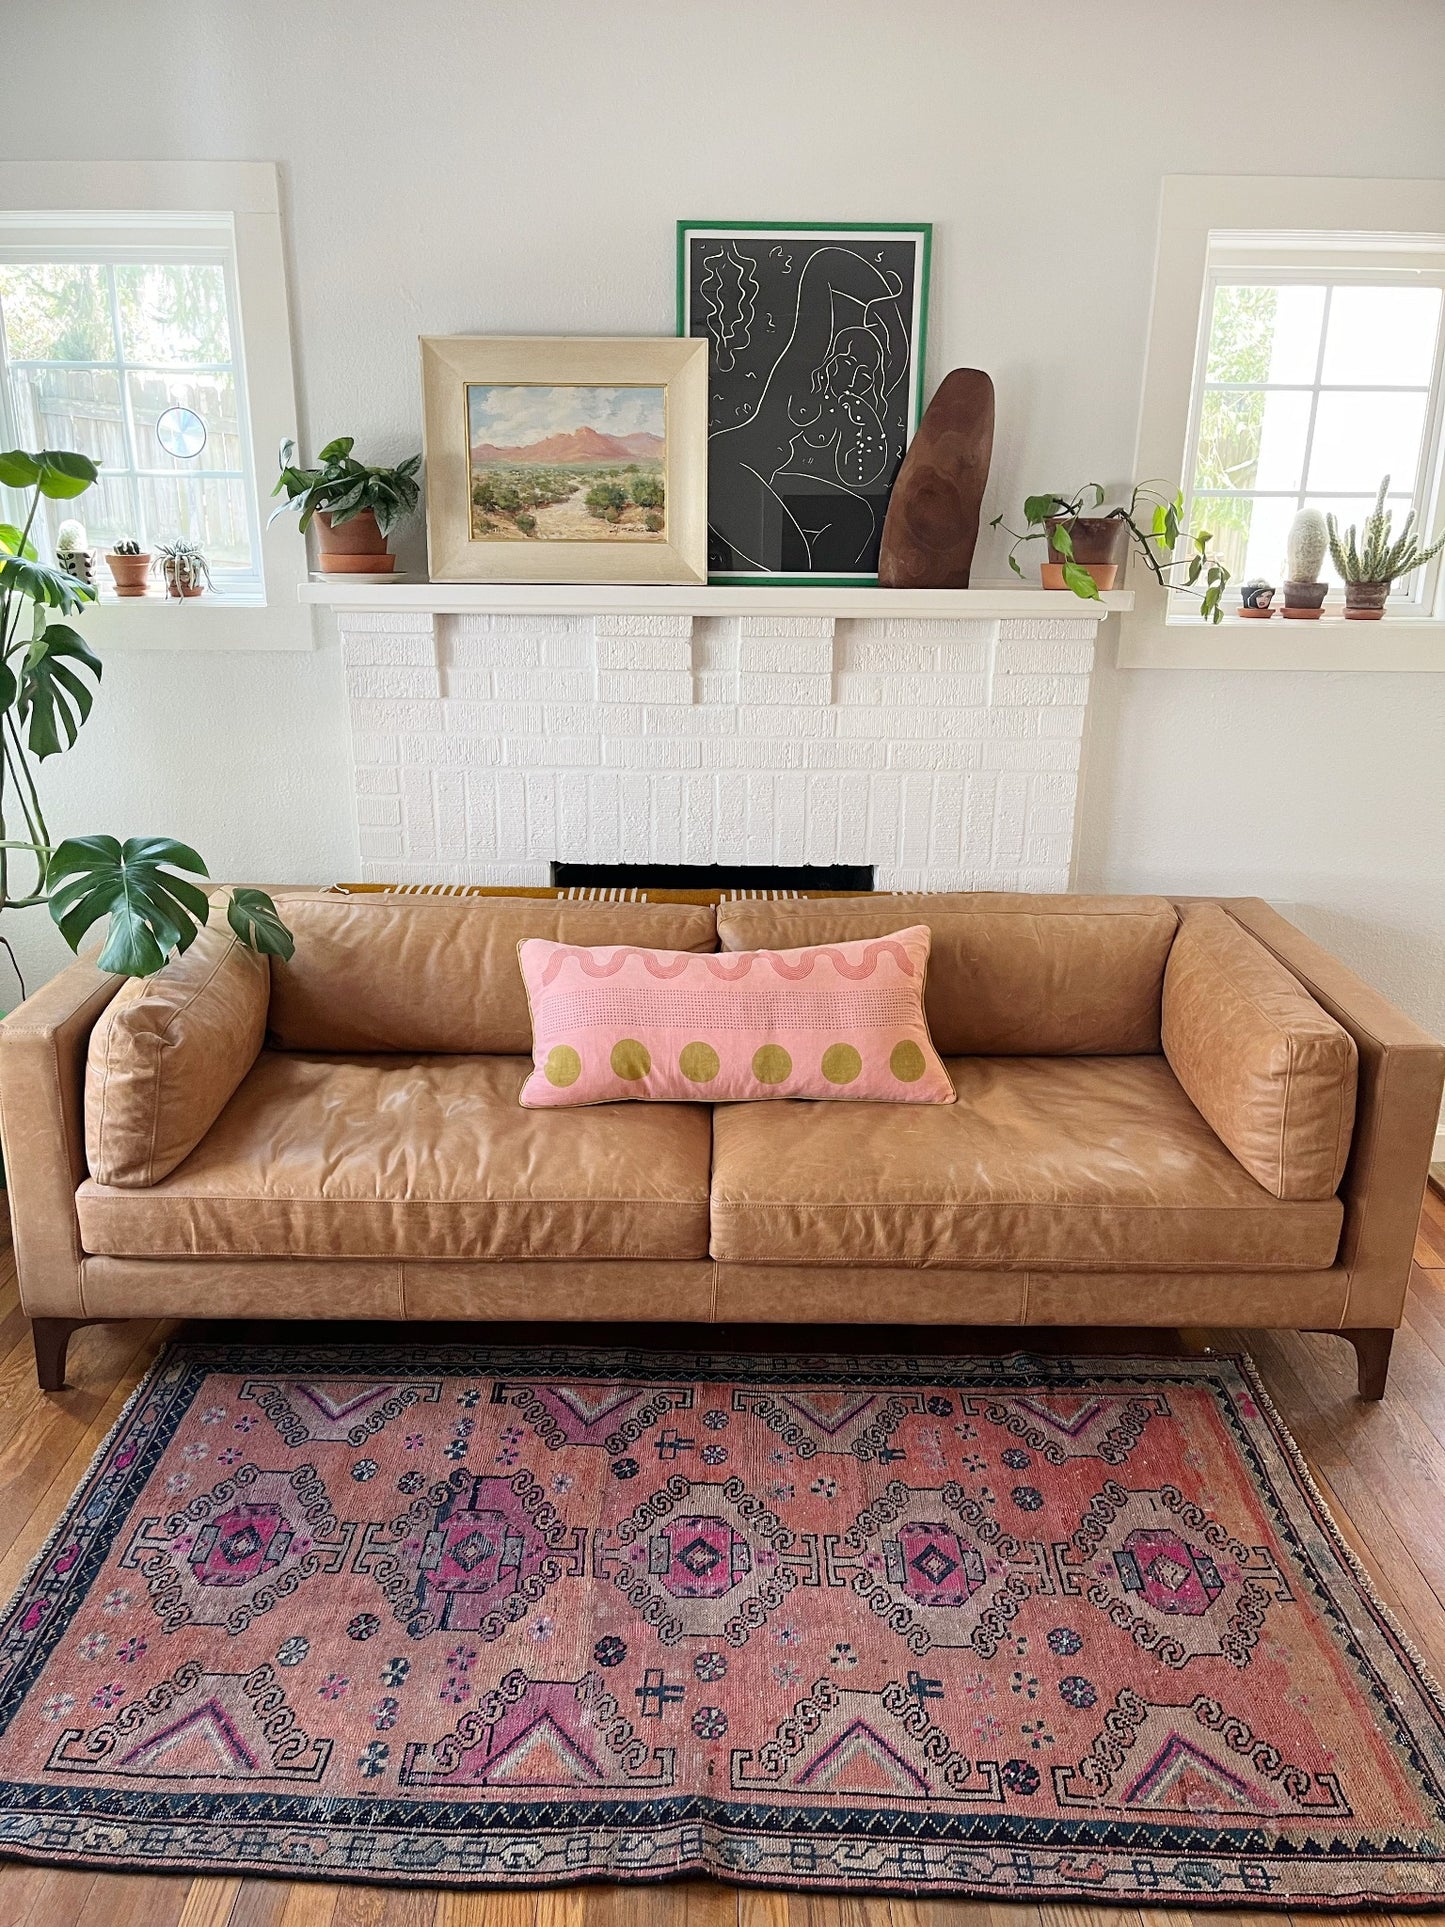 See Birch Vintage Persian Rug in a Living Room